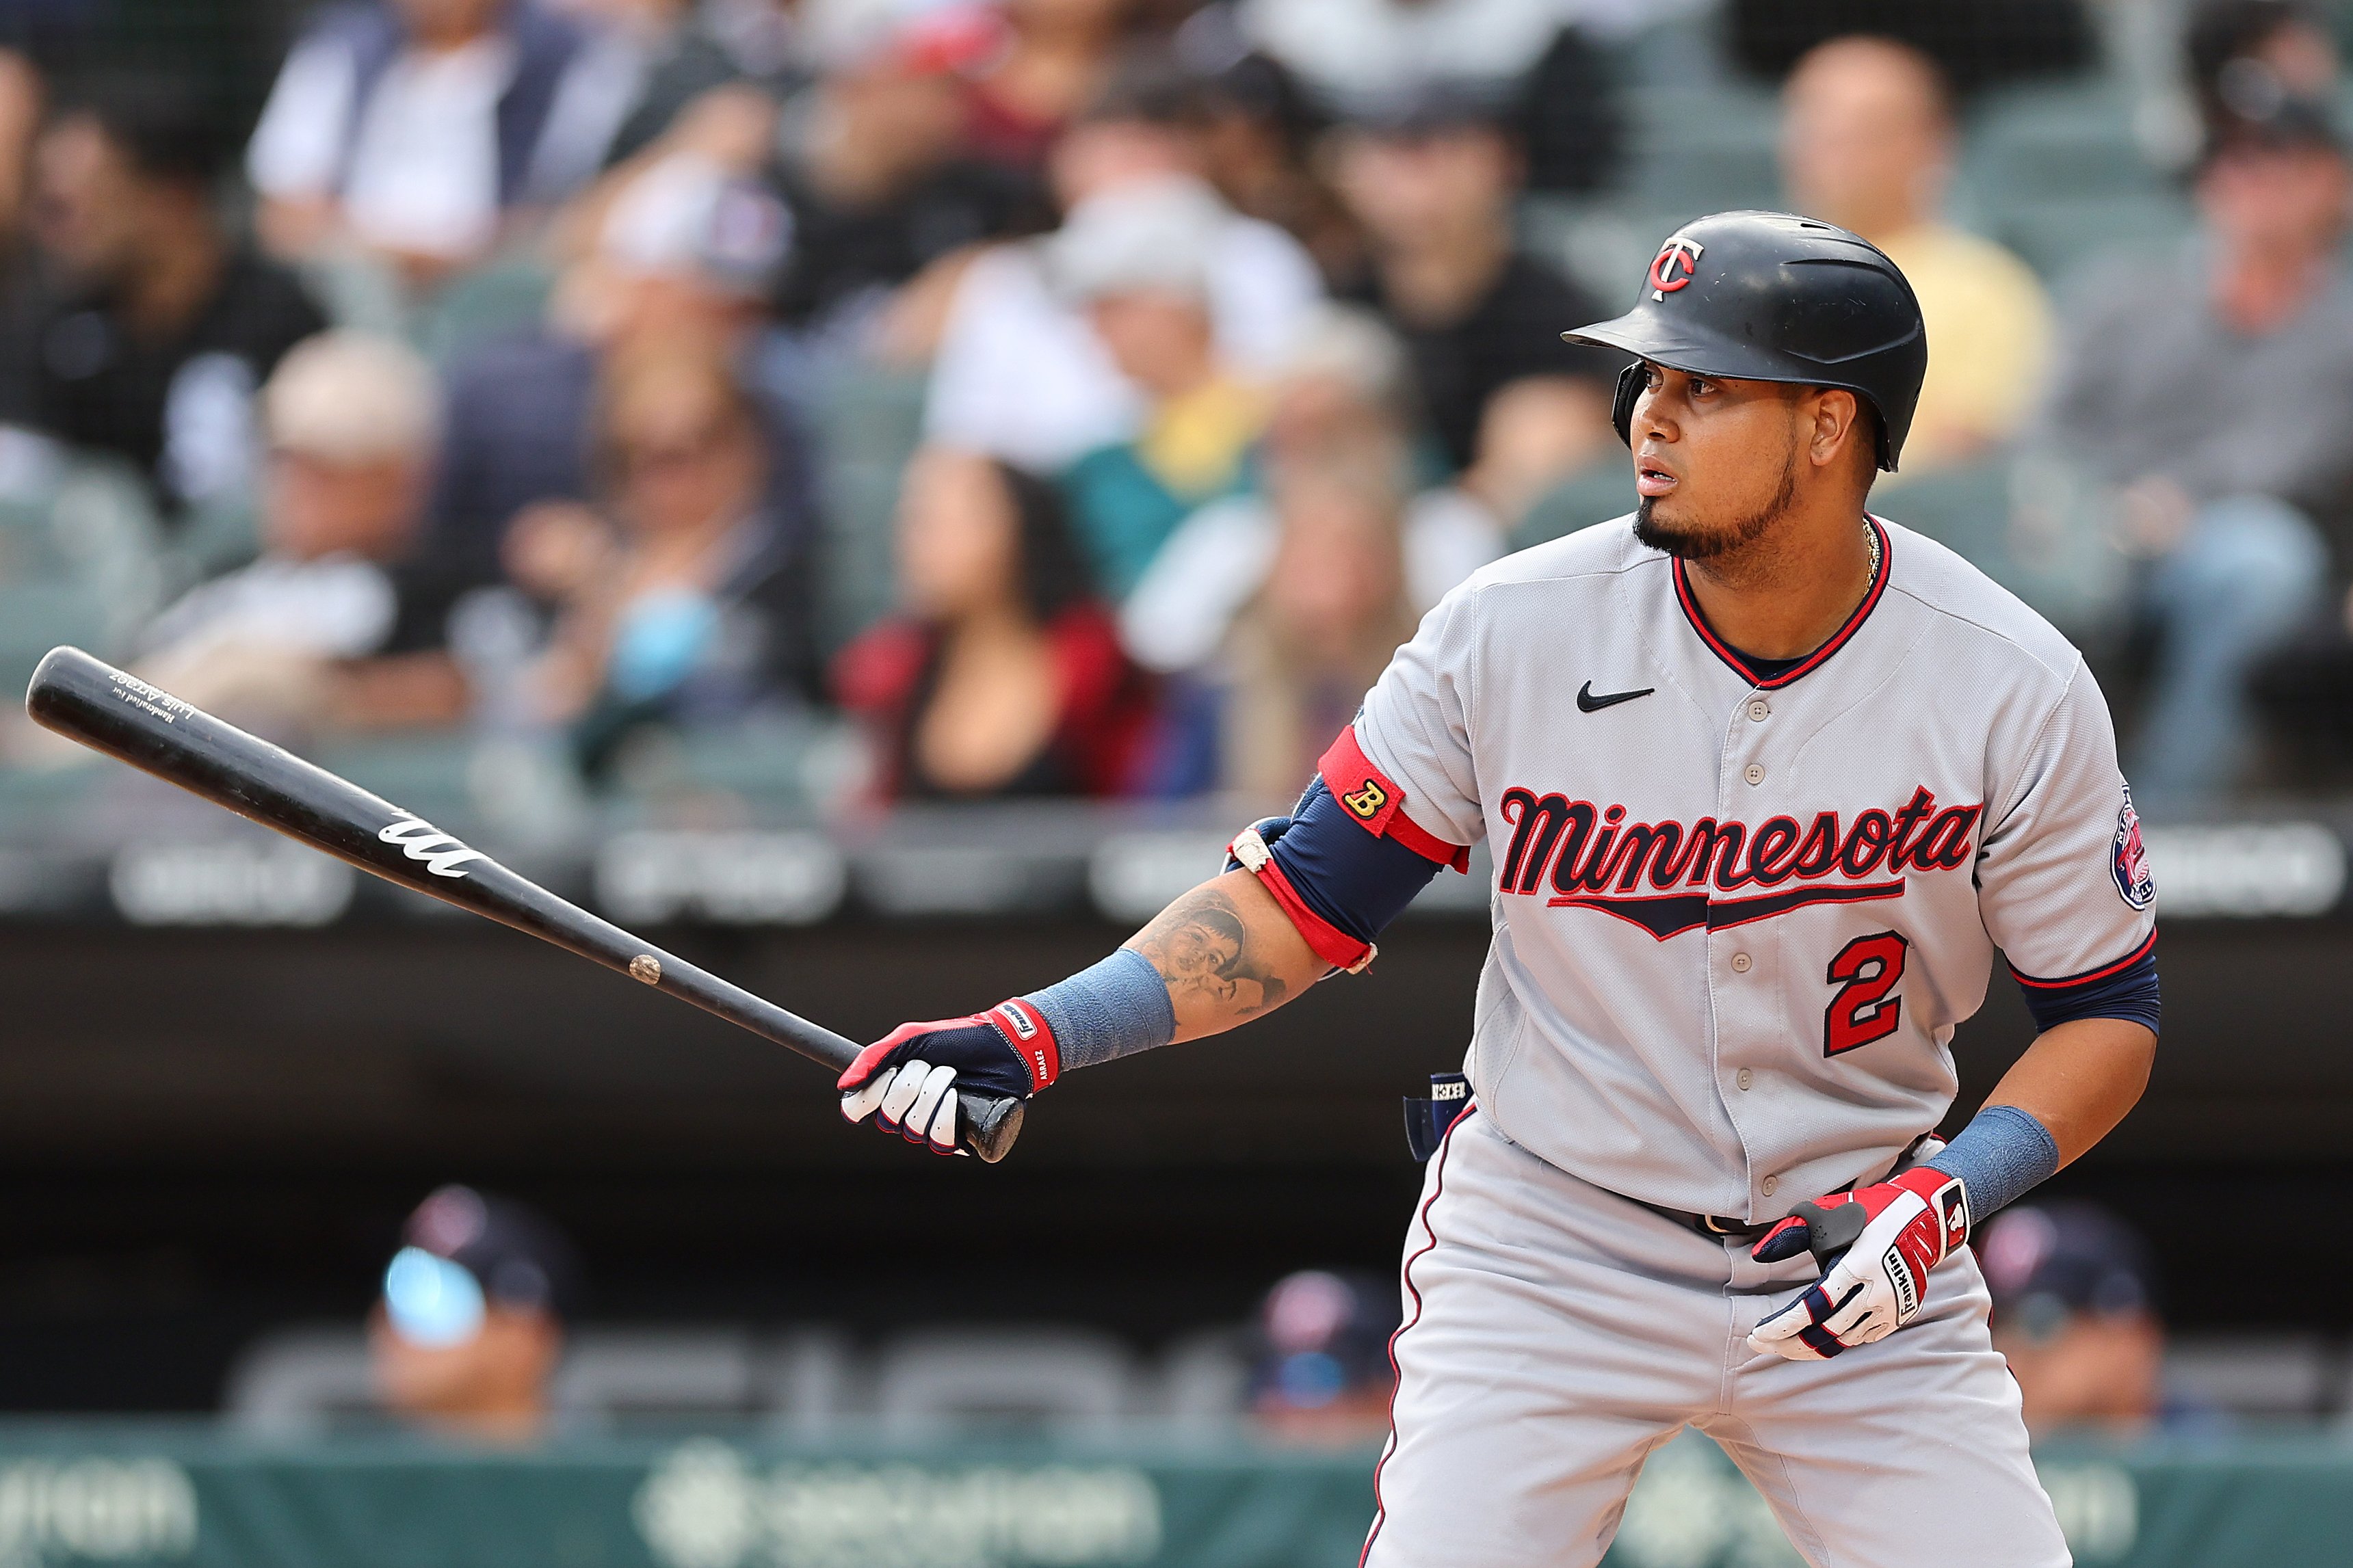 Luis Arraez #2 of the Minnesota Twins at bat against the Chicago White Sox during the second inning at Guaranteed Rate Field on October 05, 2022 in Chicago, Illinois.